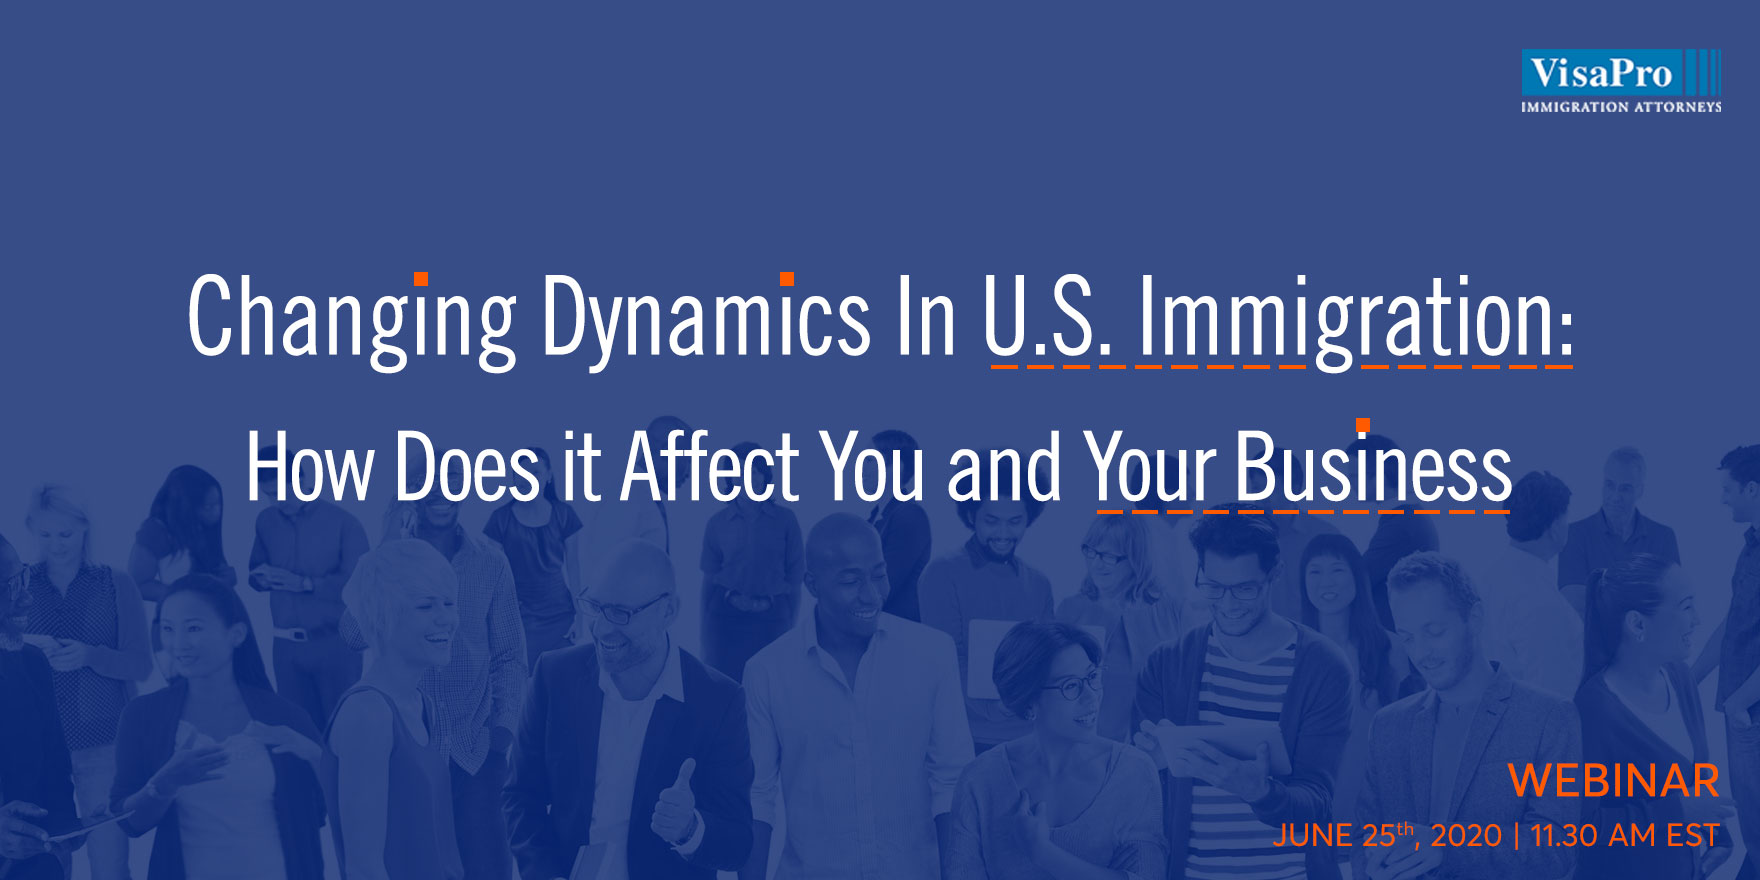 US Immigration Changes - How Does It Affect You and Your Business?, Sydney, New South Wales, Australia